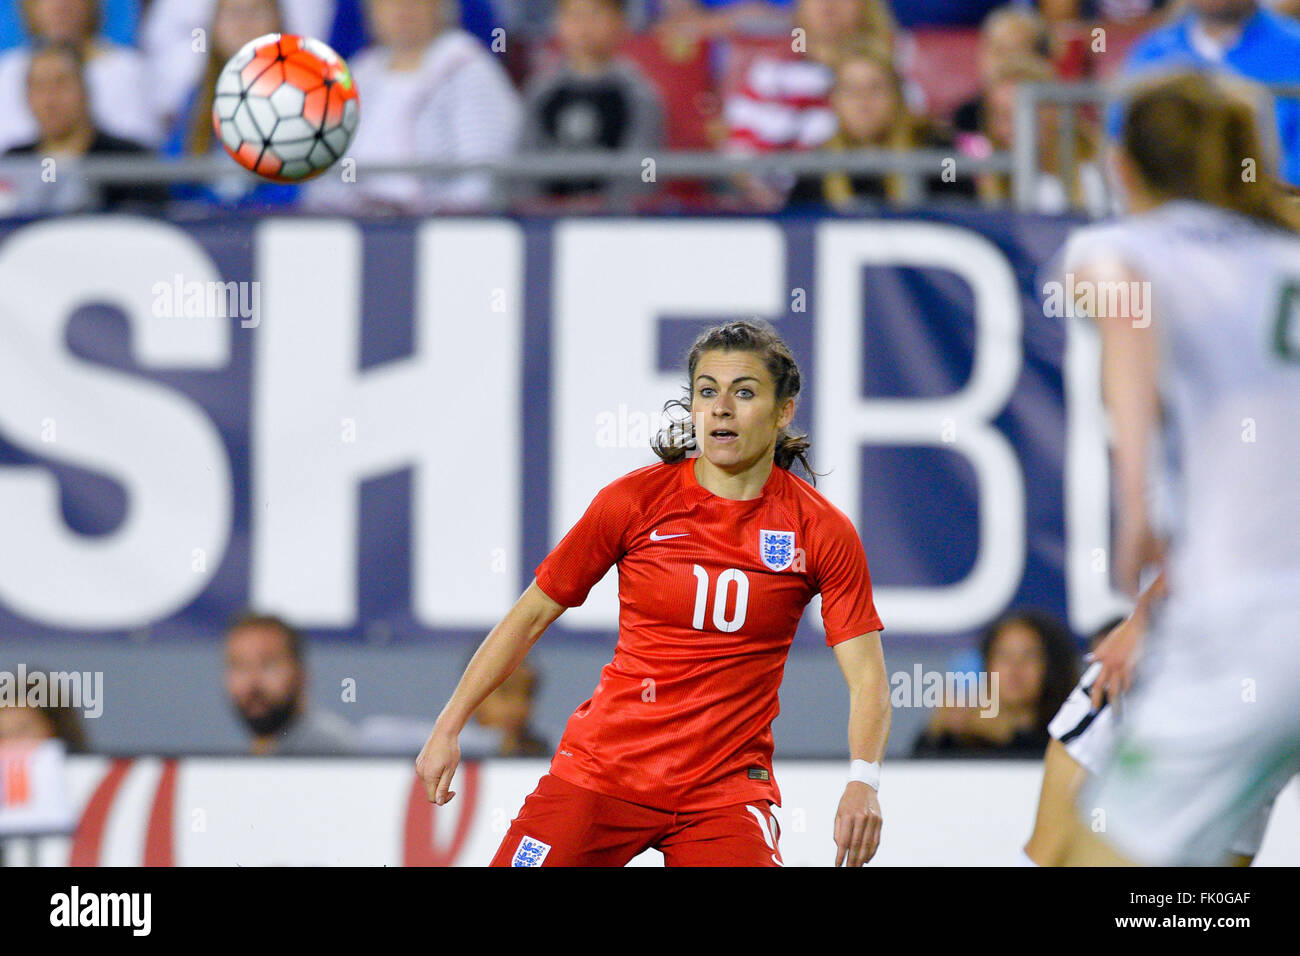 Tampa, Florida, USA. 3rd Mar, 2016. England forward Karen Carney (10) during a She Believes Cup game against the United States at Raymond James Stadium on March 3, 2016 in Tampa, Florida. The US won 1-0. © Scott A. Miller/ZUMA Wire/Alamy Live News Stock Photo